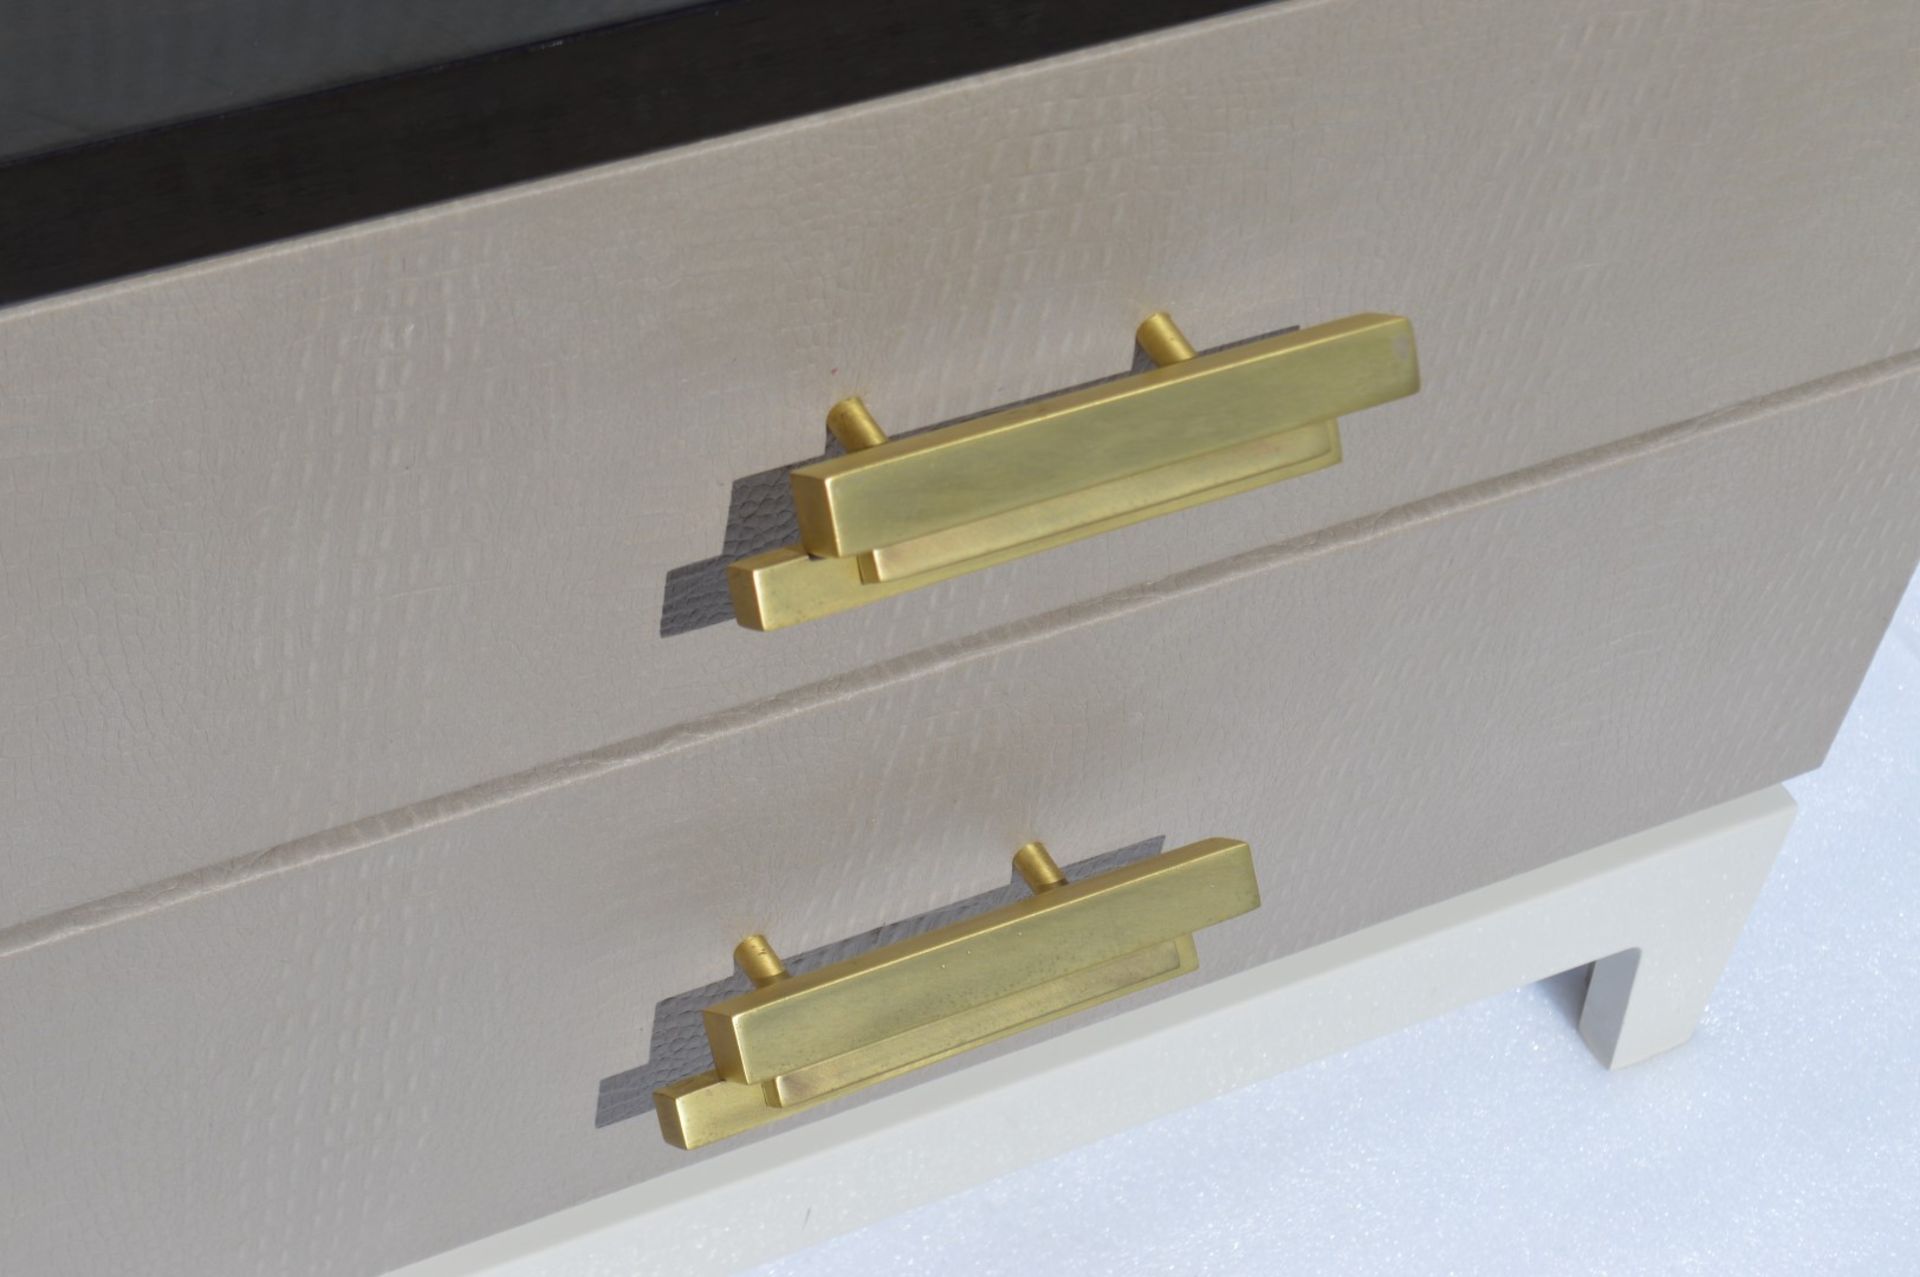 1 x Designer 2-Drawer Small Bedside Unit (Black/gold) With Crocodile Effect Drawers, Ornate Handles - Image 2 of 7